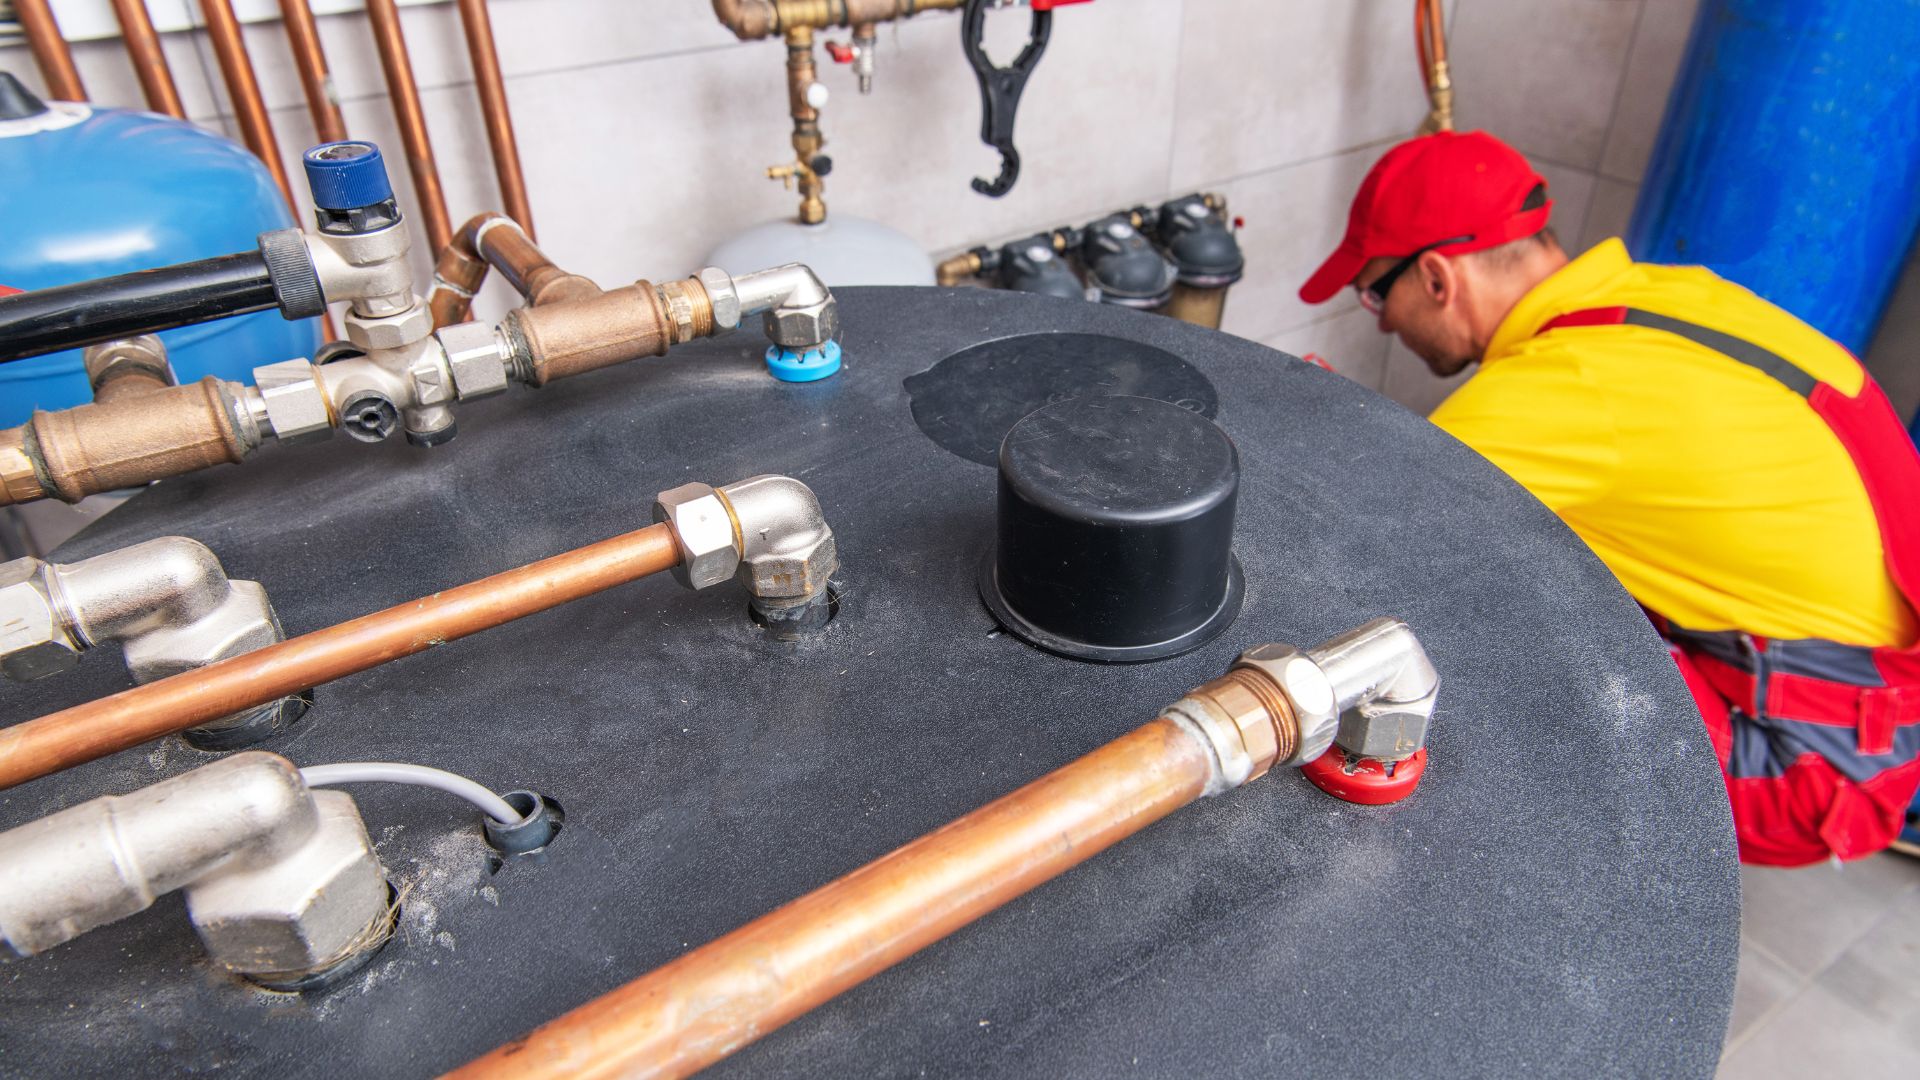 Contact CAN Plumbing and Drainage for any requirements regarding your hot water tank, with expert plumbers ready to assist you.